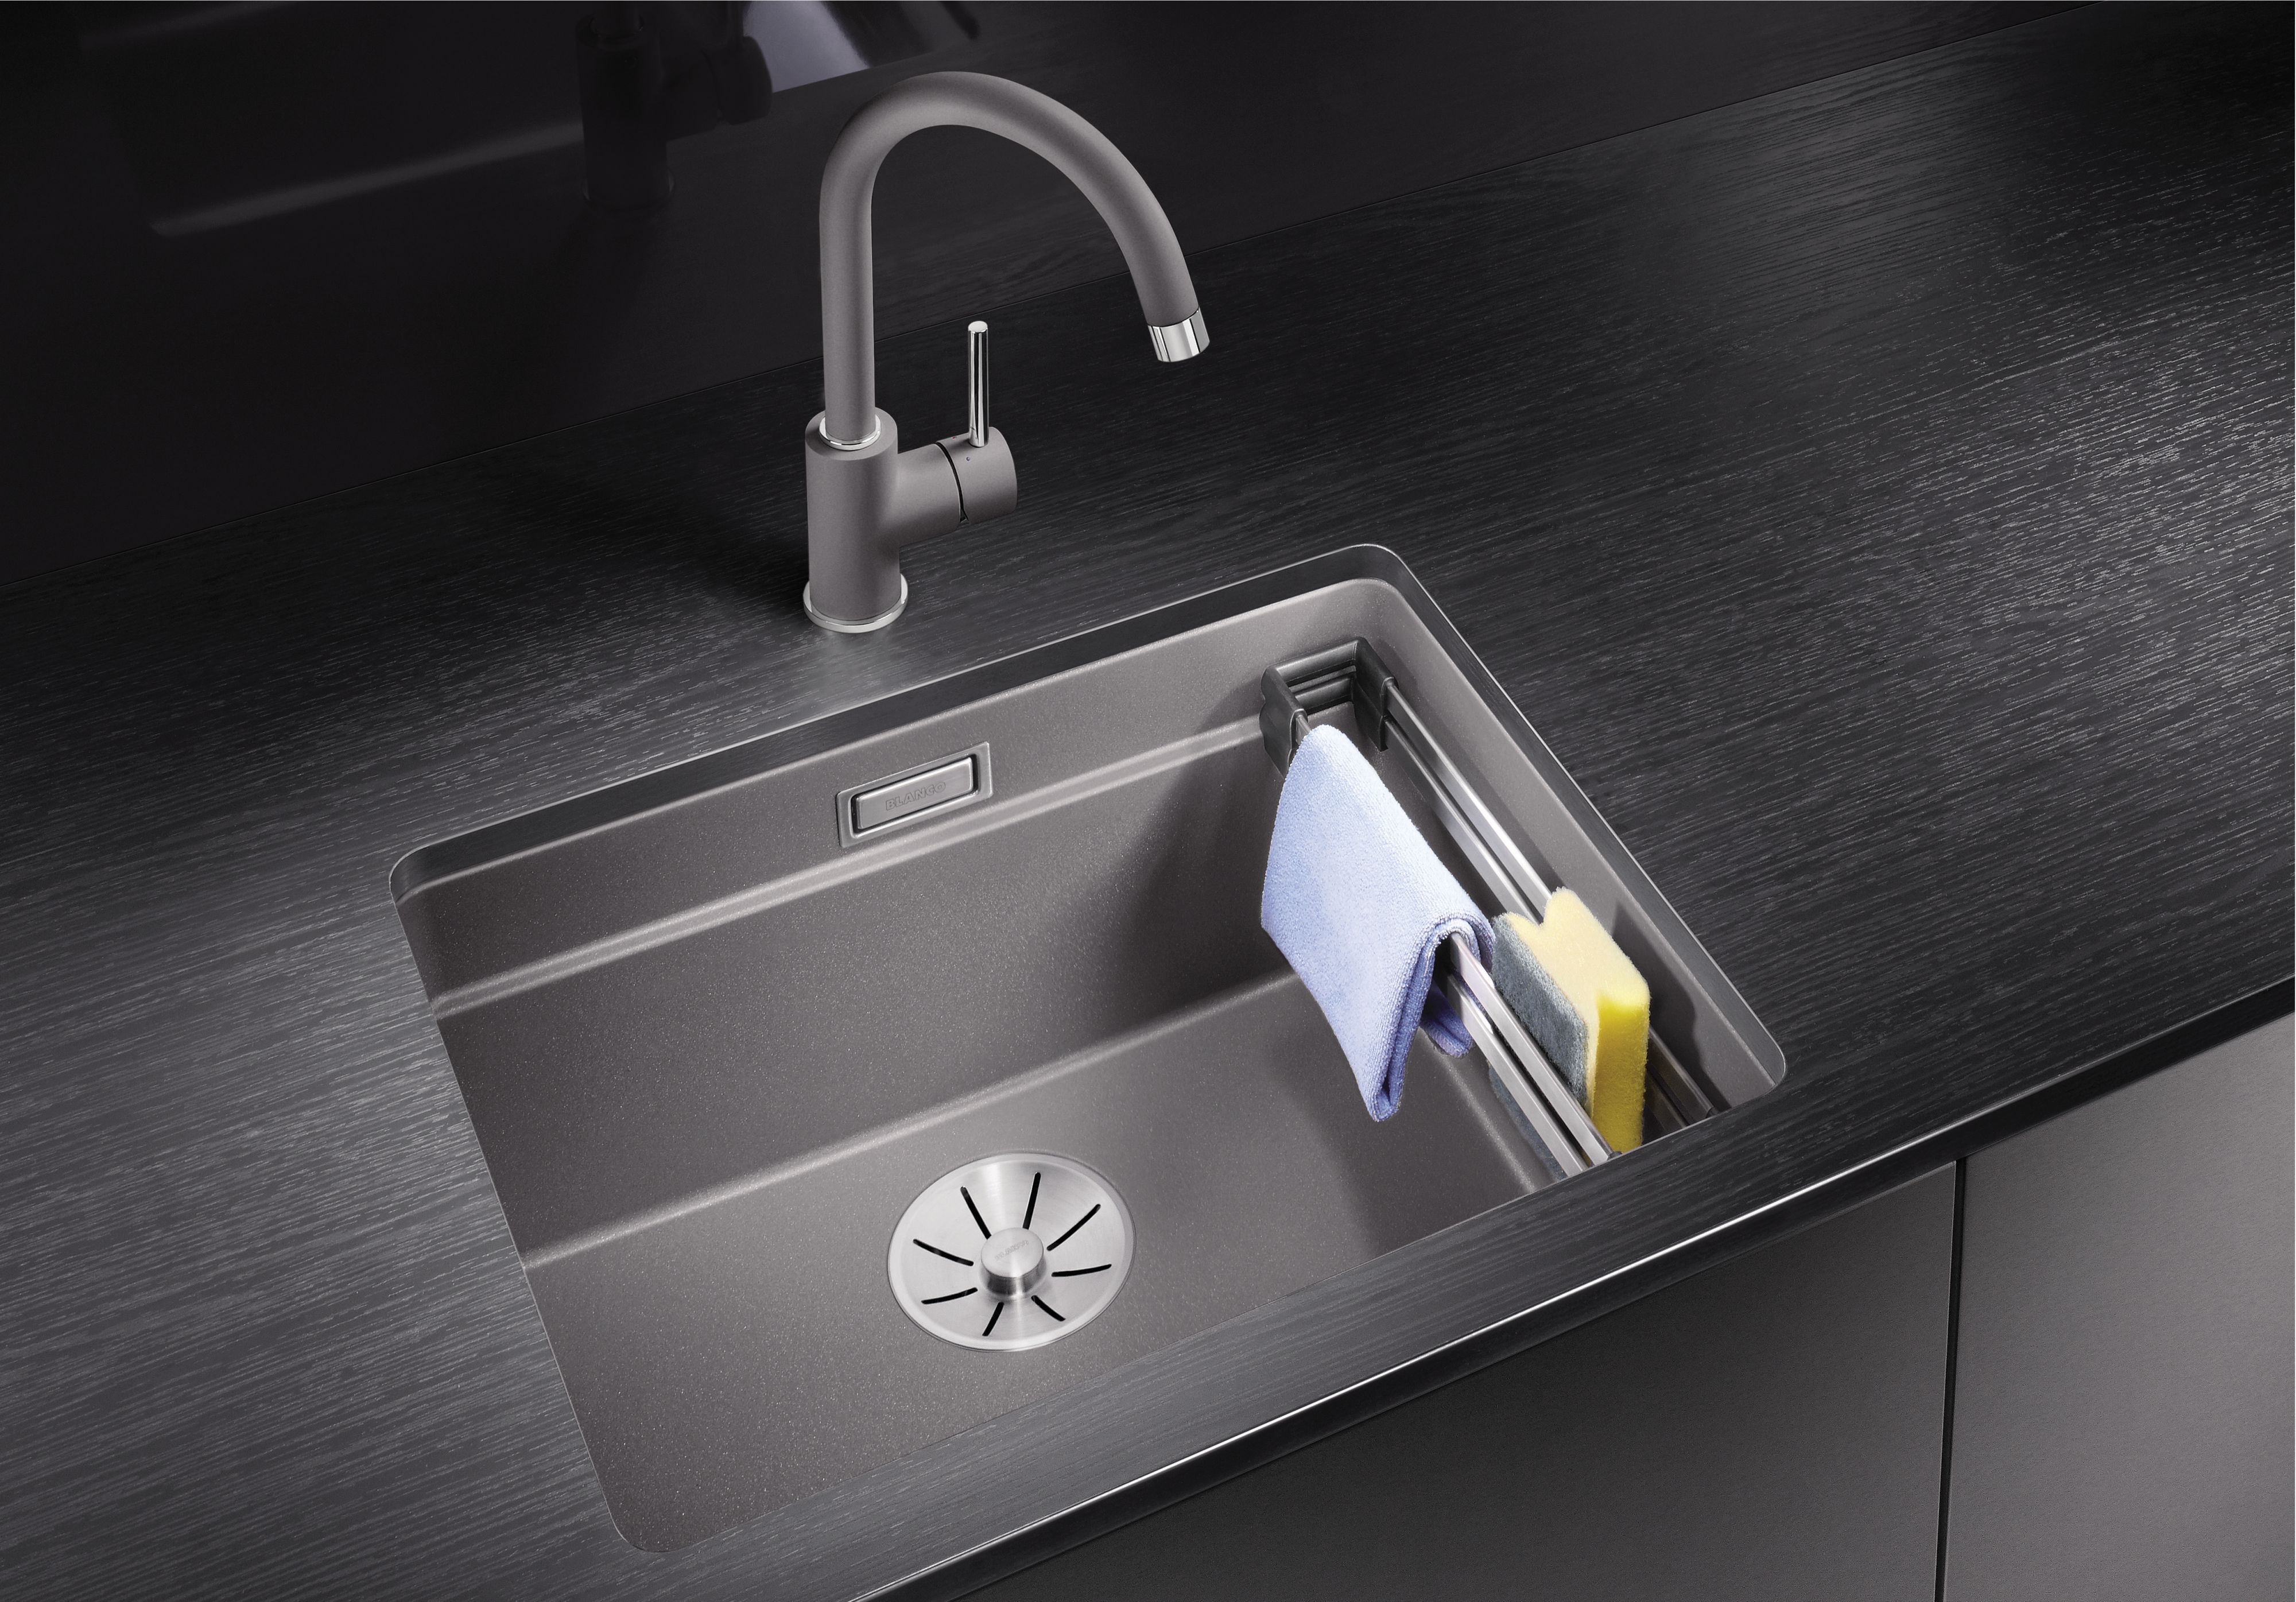 The BLANCO ETAGON also provides a place for stowing dishwashing utensils.